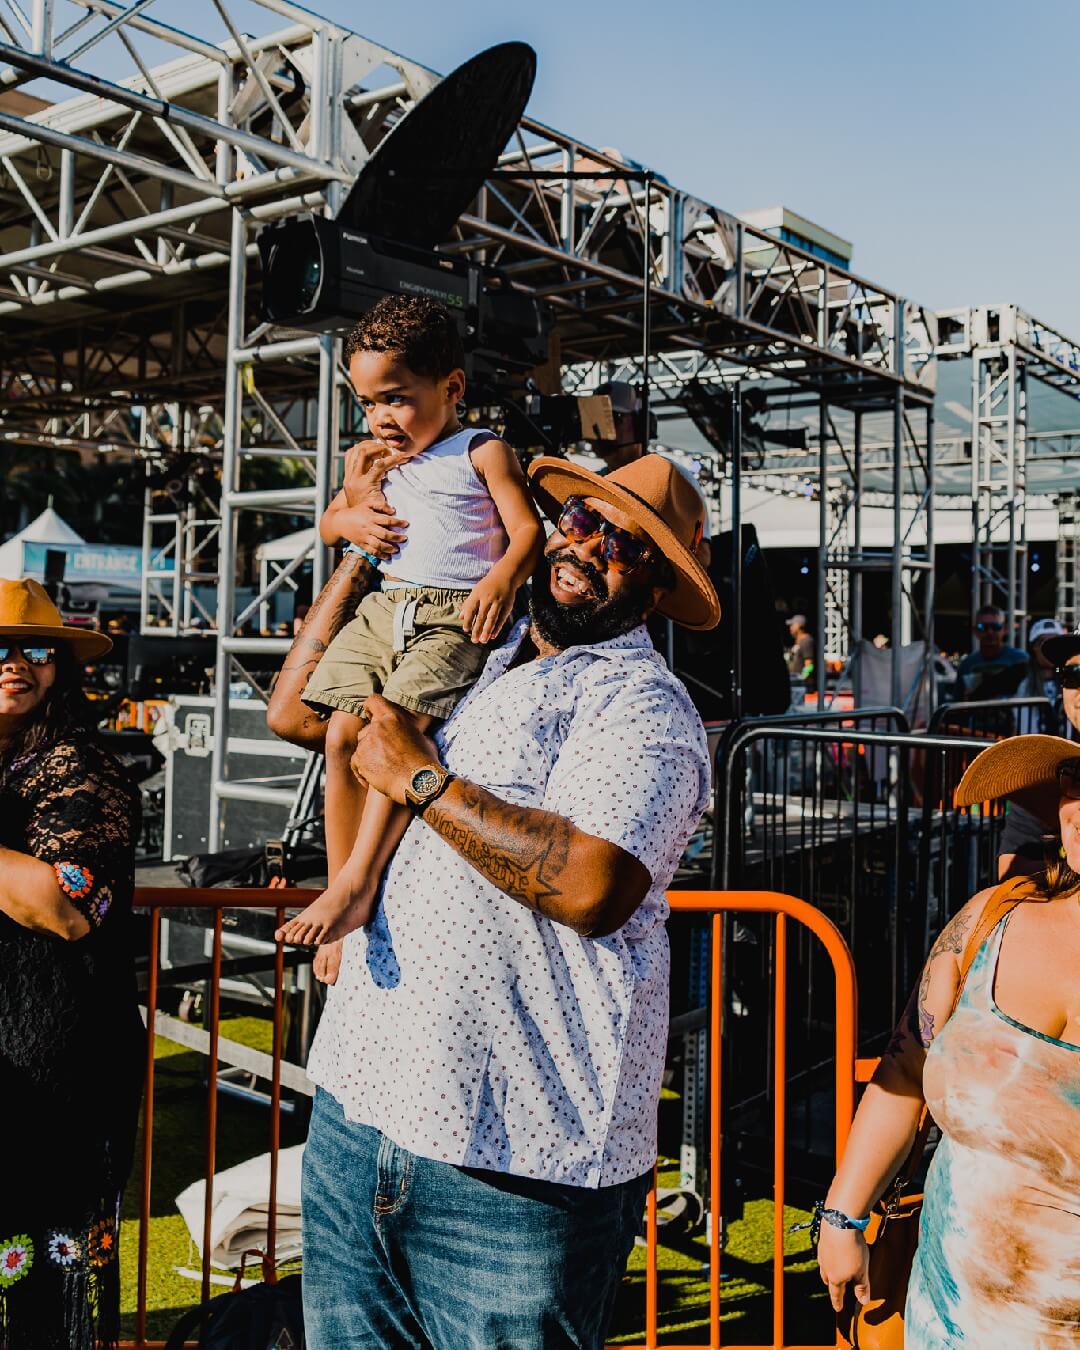 man hoists baby up in air at outdoor concert